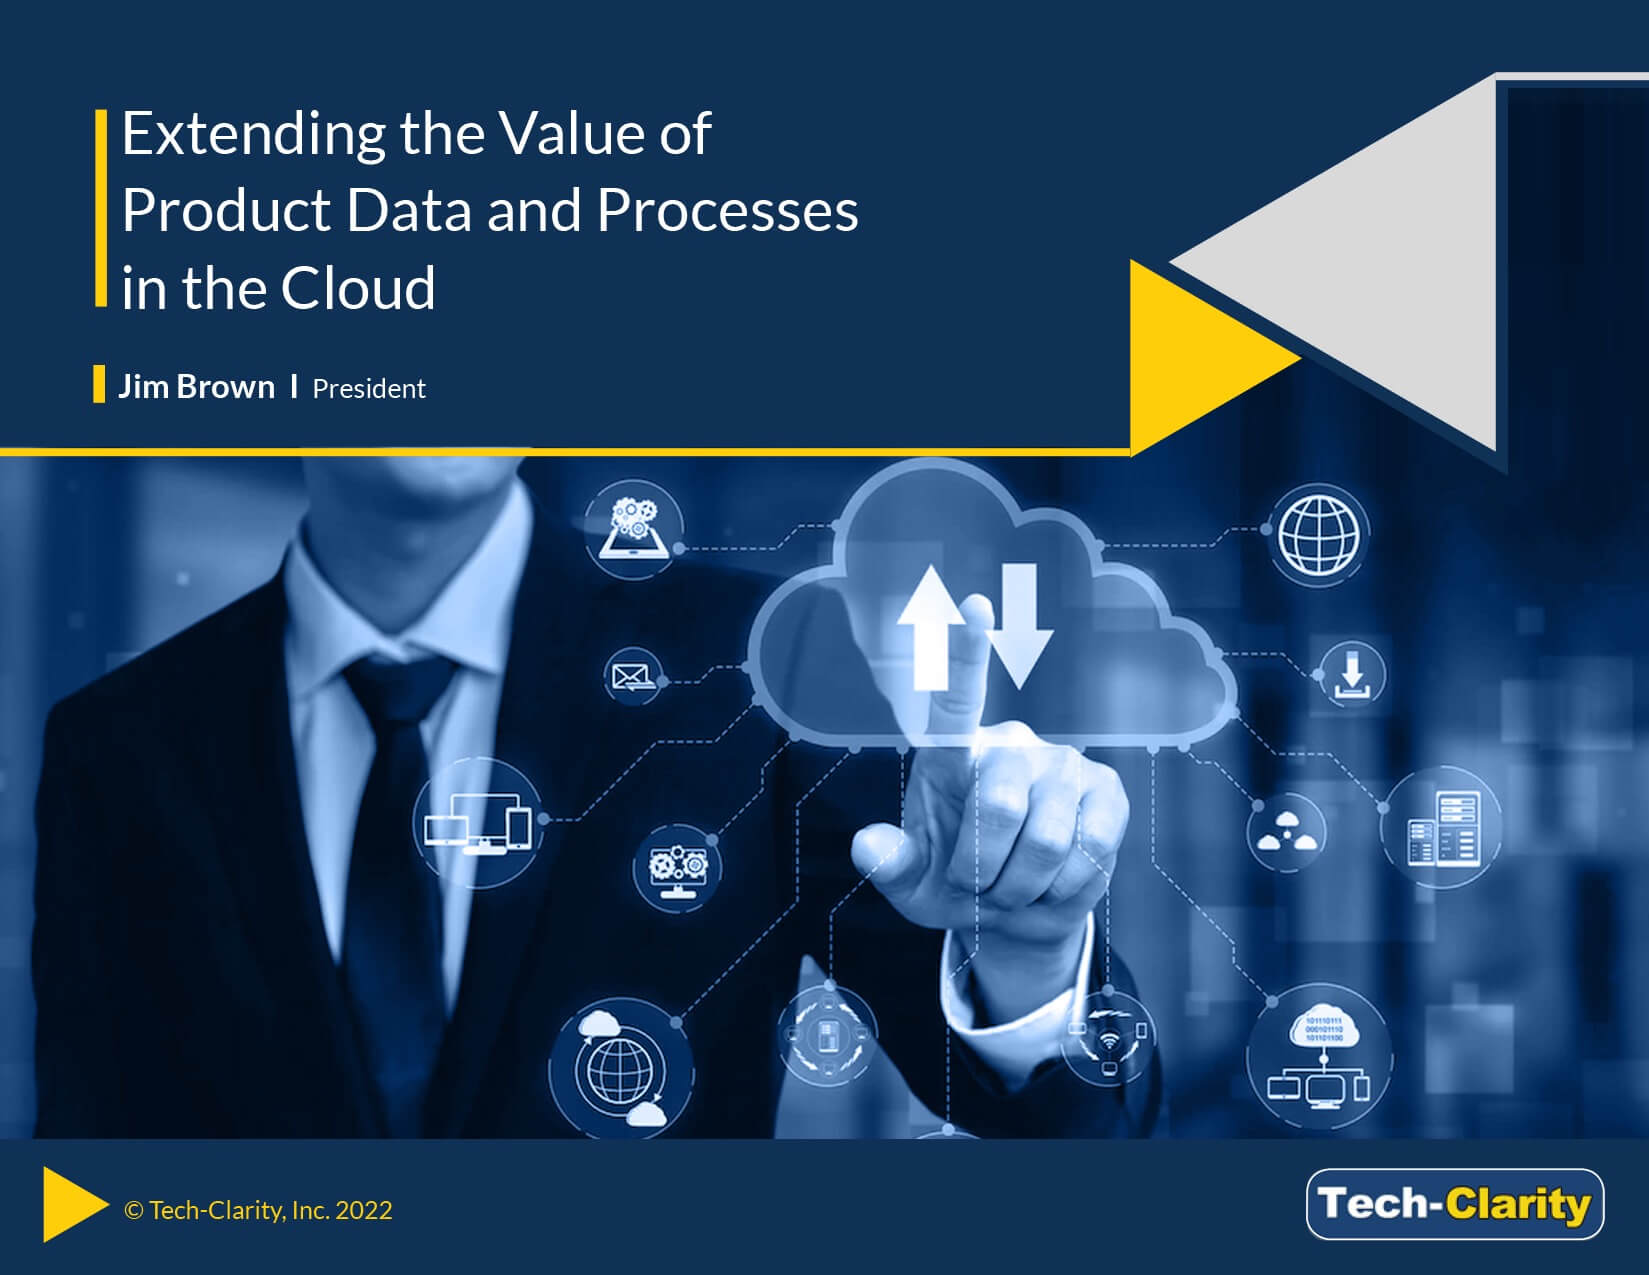 Product Data and Processes